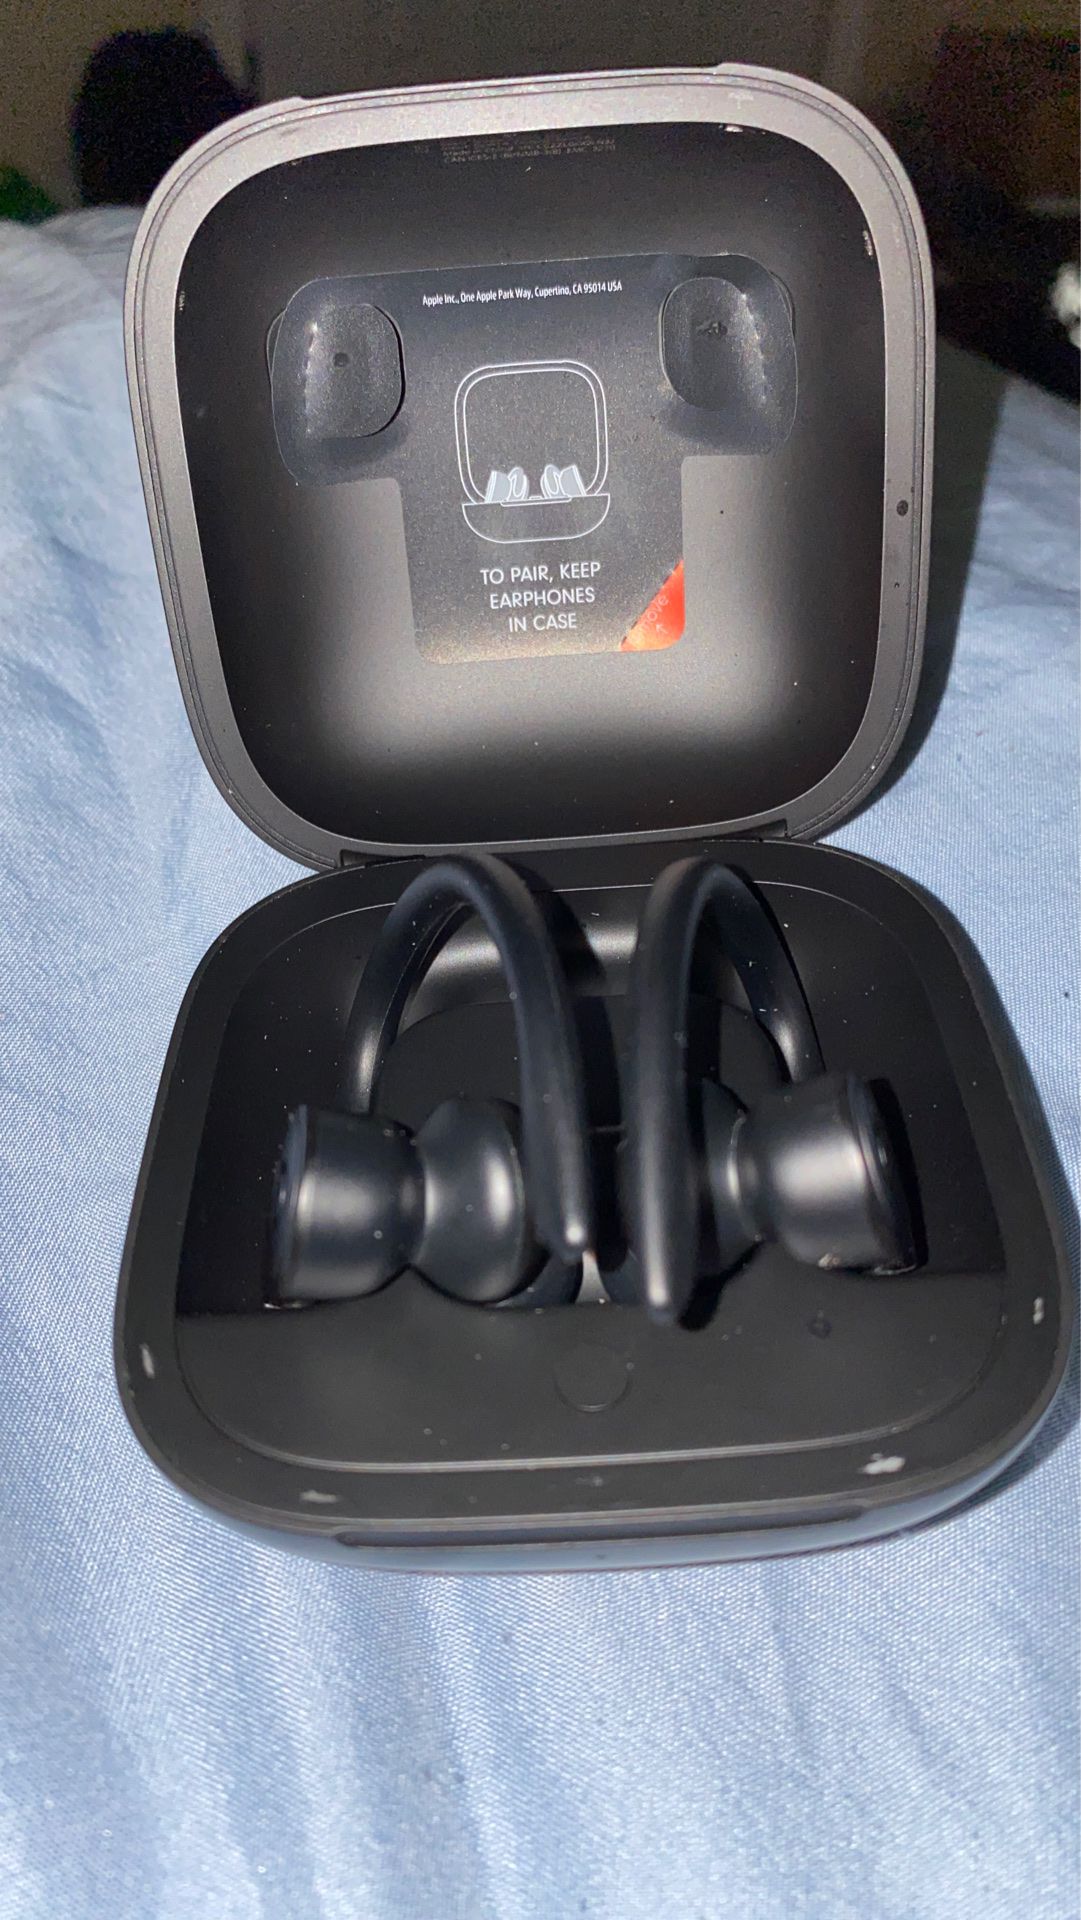 BEATS Wireless. Had it for a few months. Excellent conditions comes with usb cable